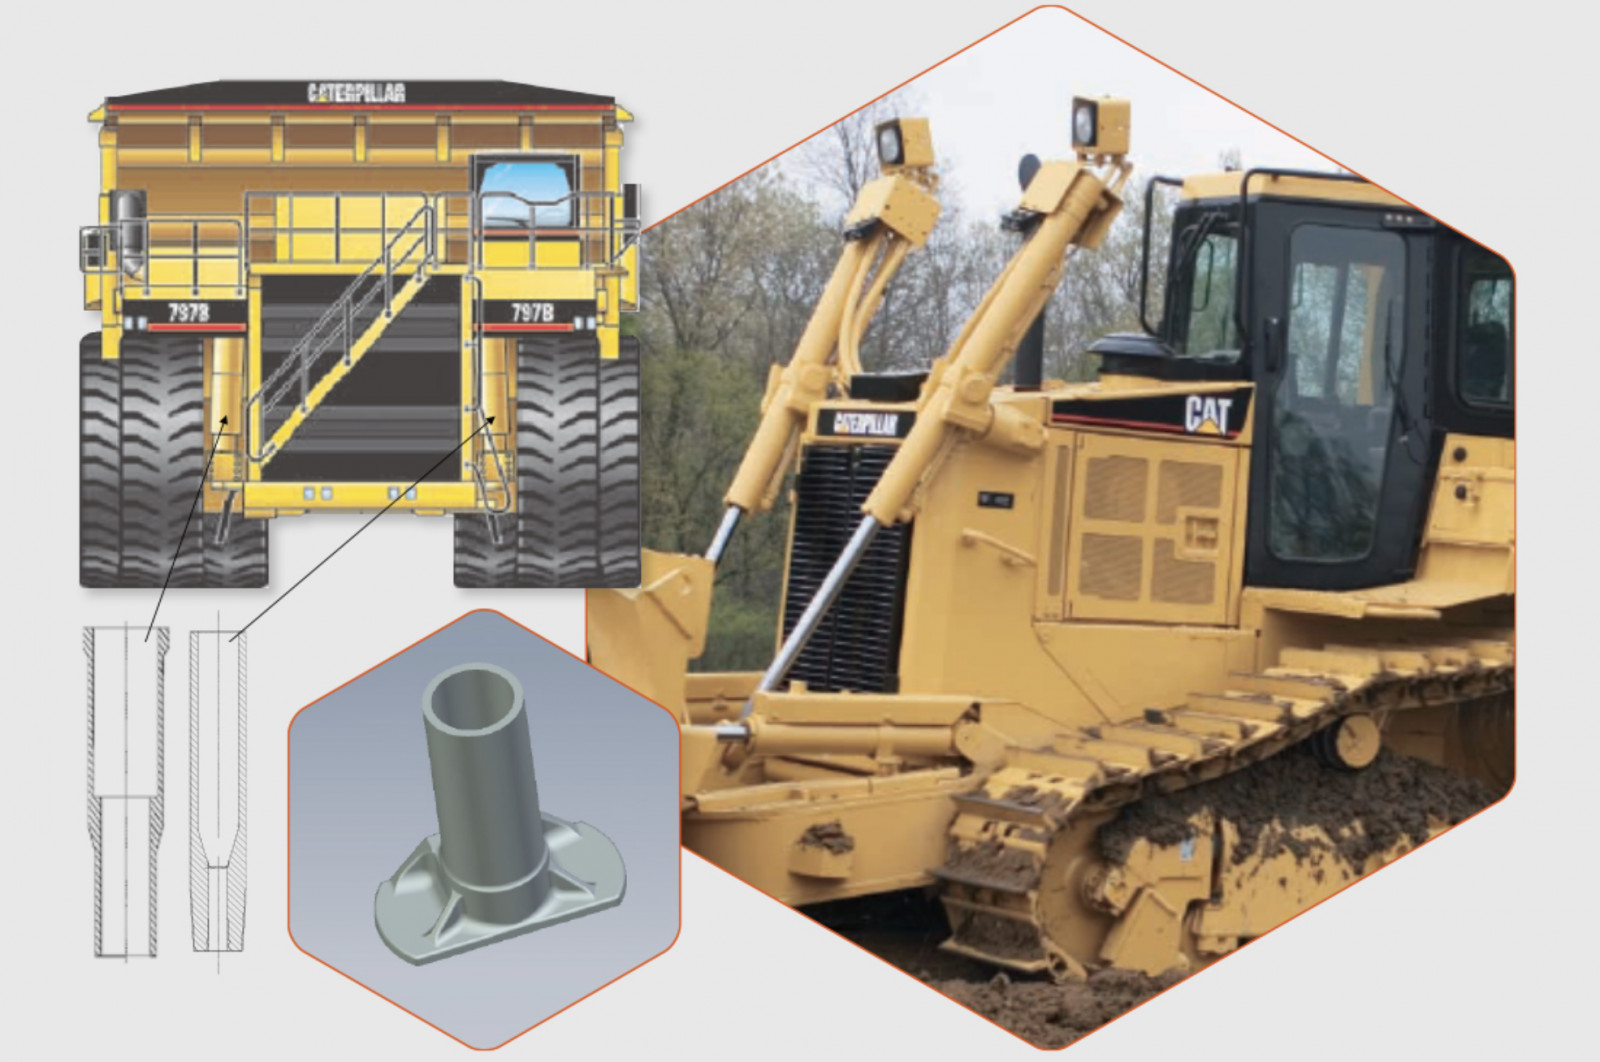 Contract extension win to supply Caterpillar